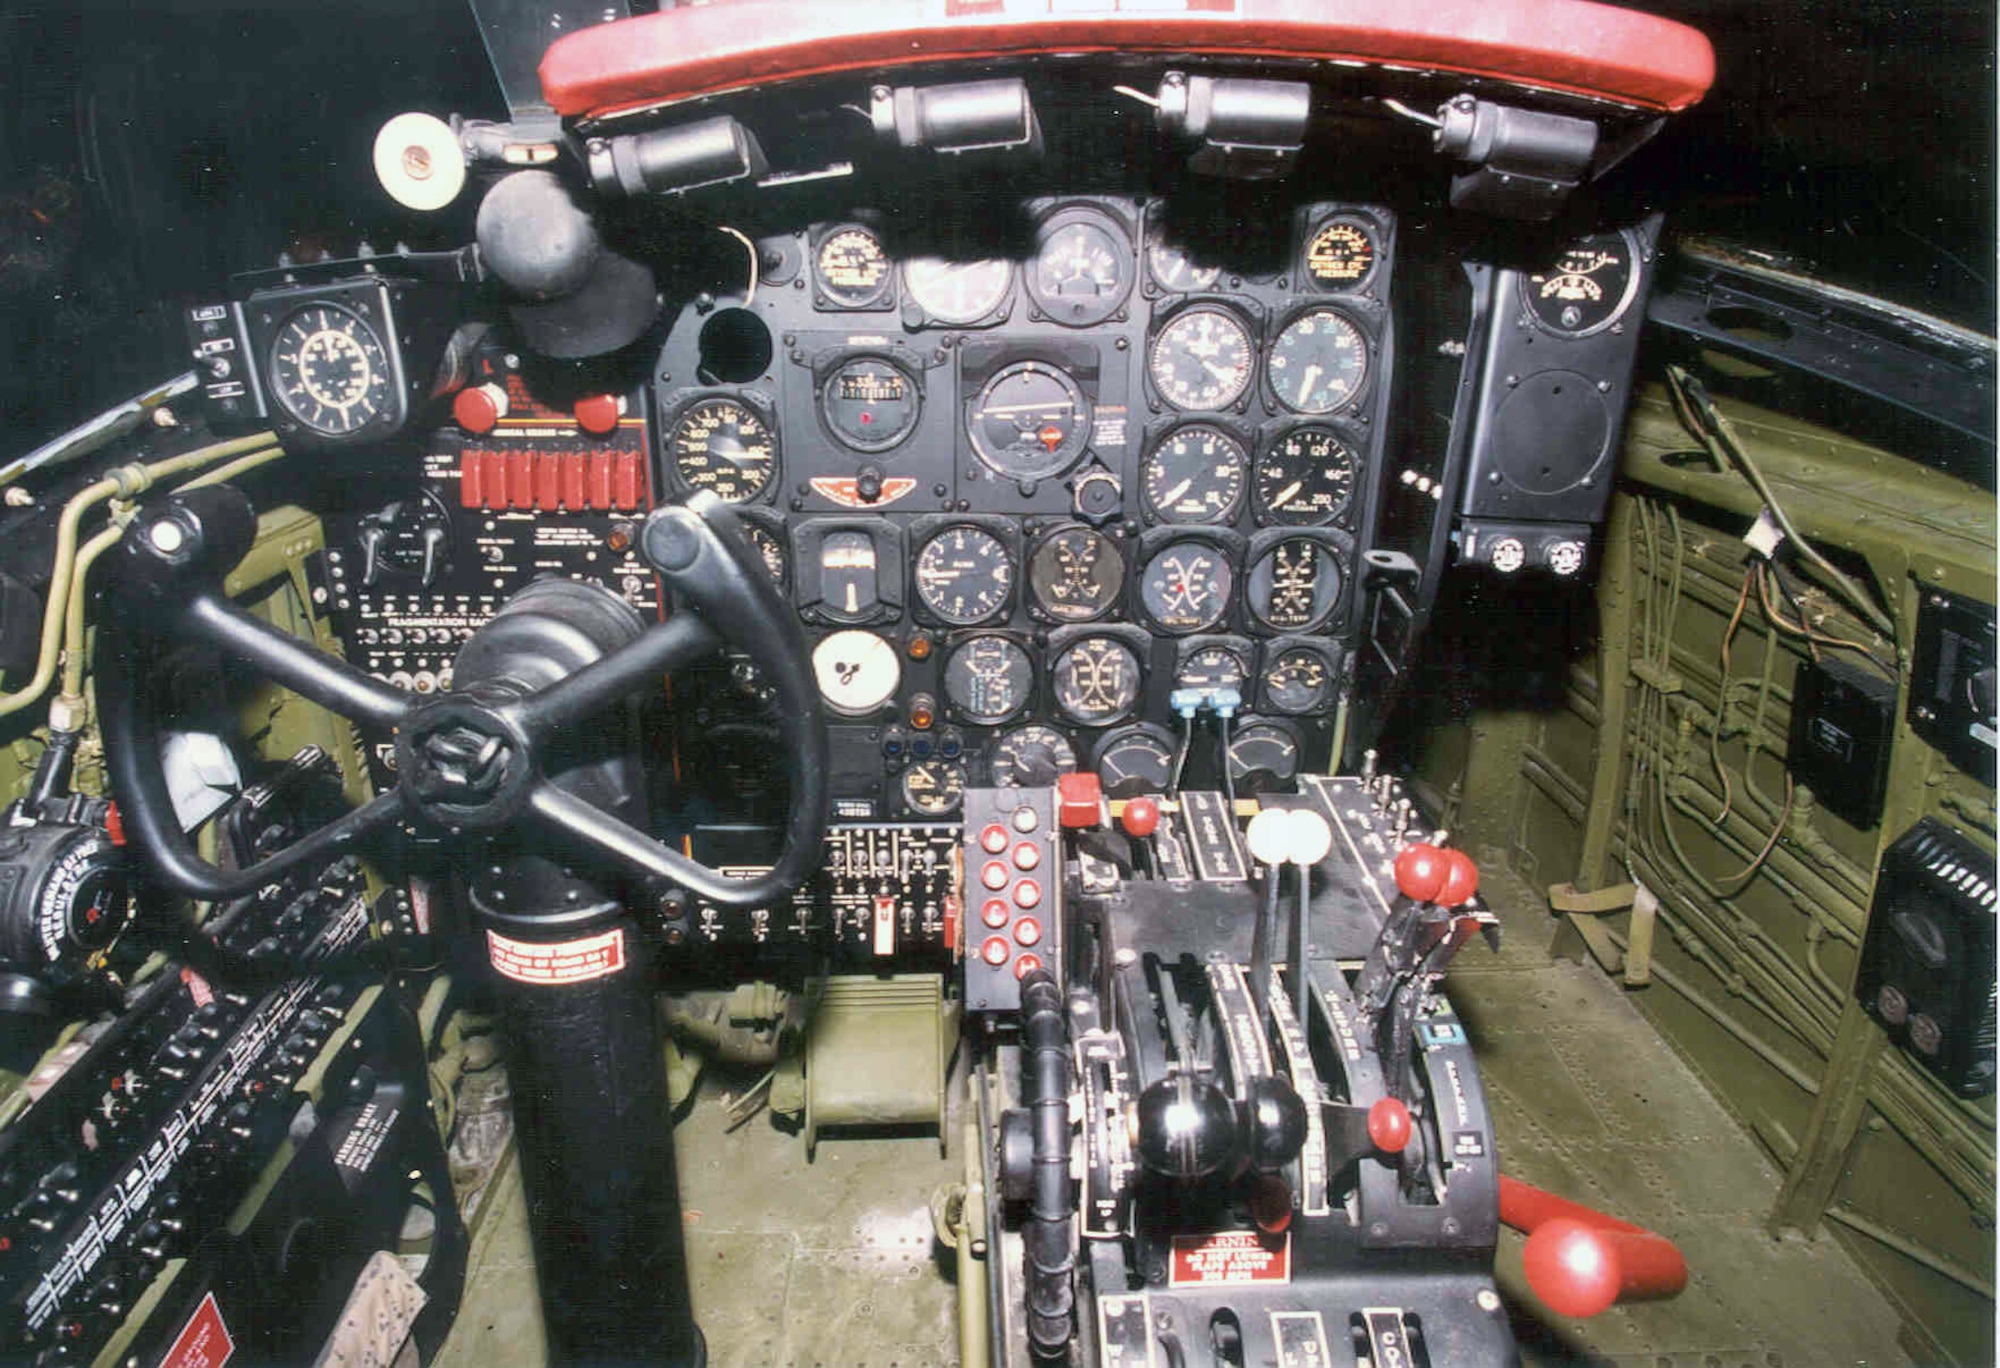 DAYTON, Ohio - Douglas A-26C Invader cockpit at the National Museum of the U.S. Air Force. (U.S. Air Force photo)